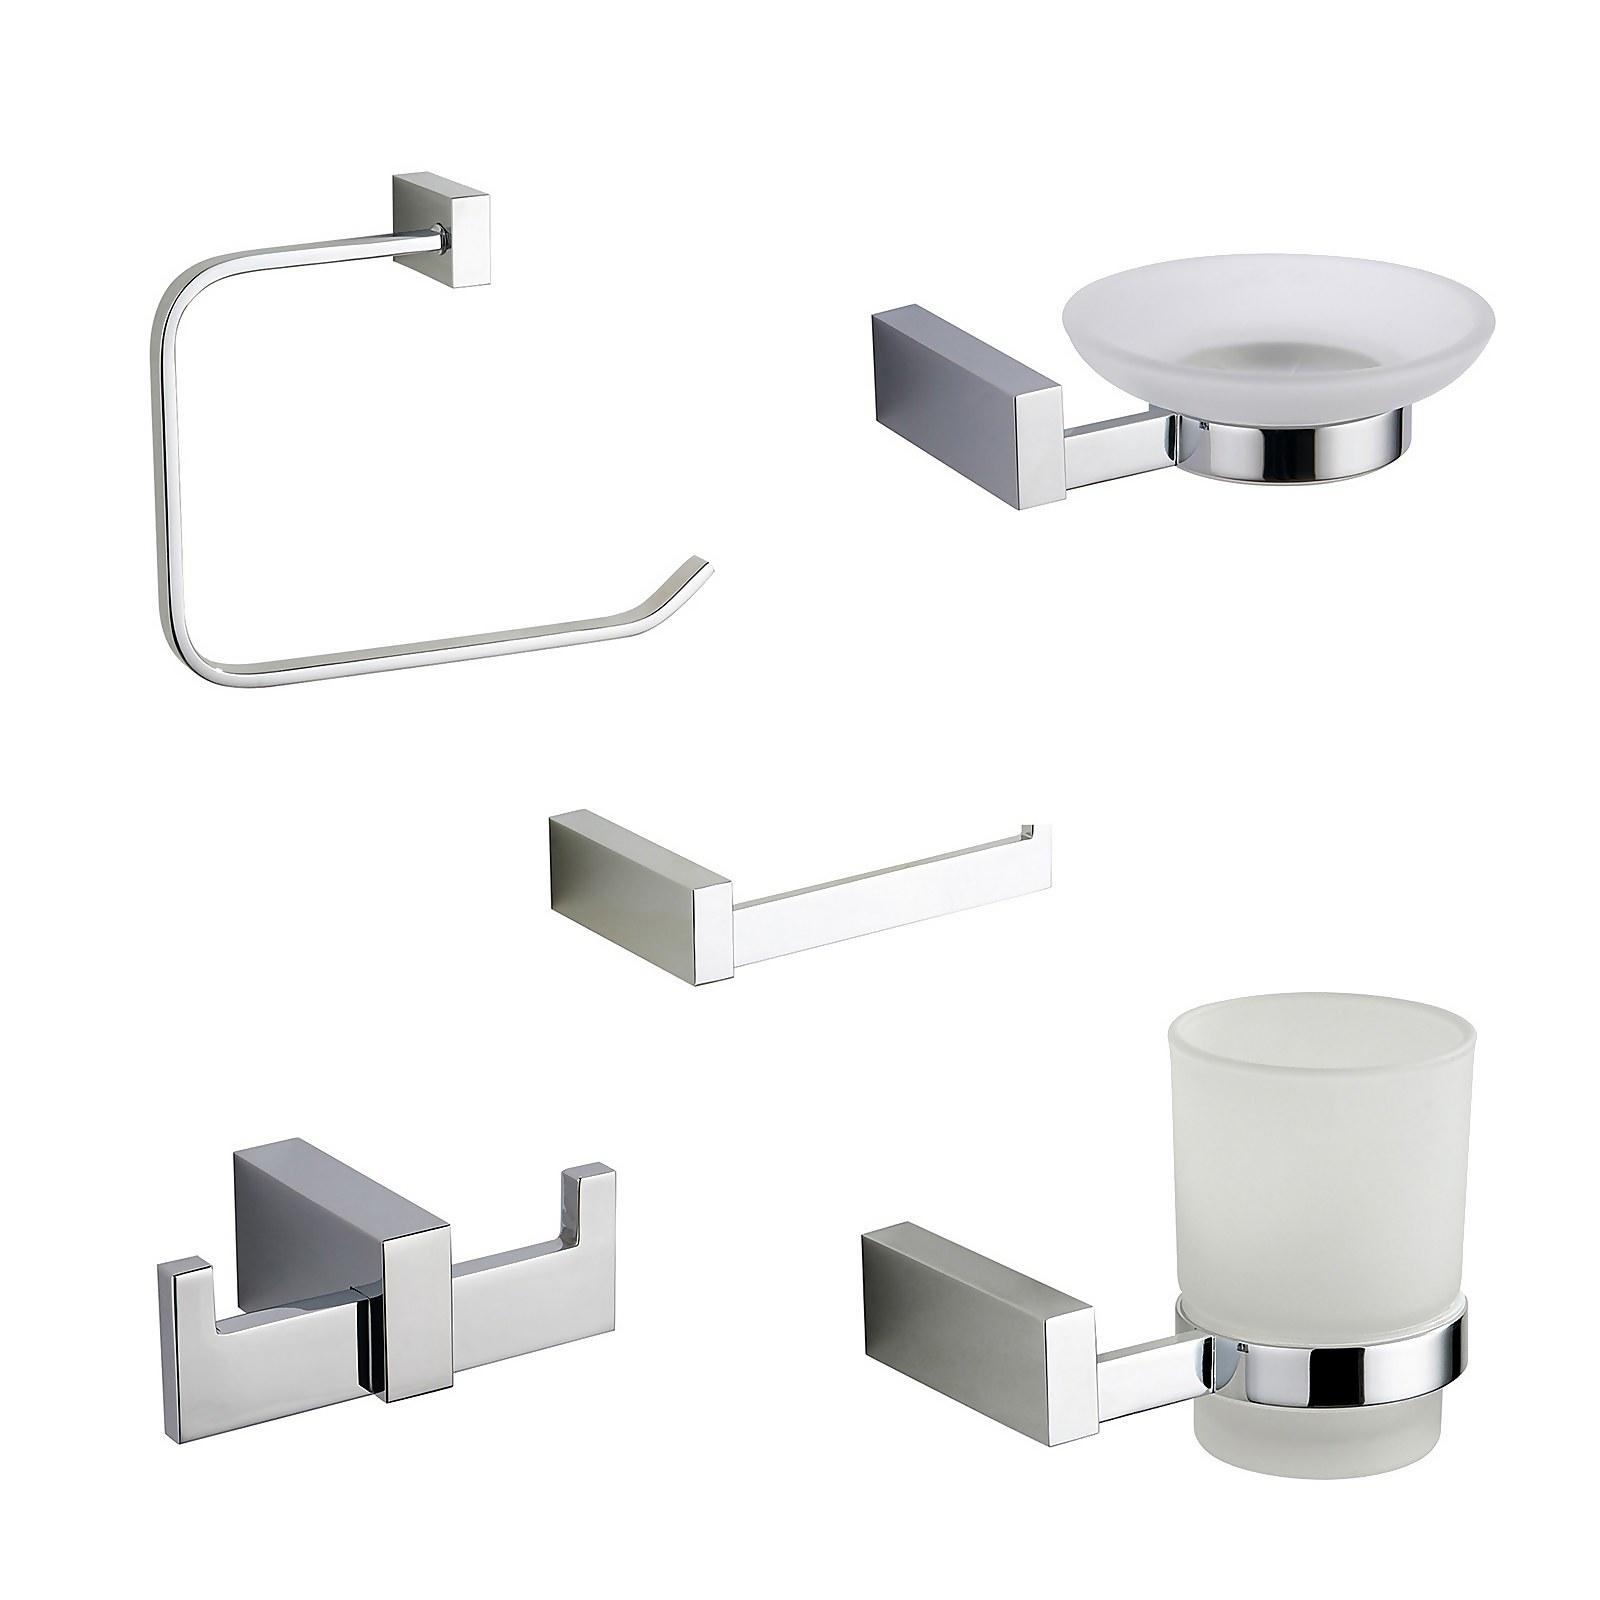 Photo of Square 5 Piece Piece Wall Mounted Bathroom Accessories Set